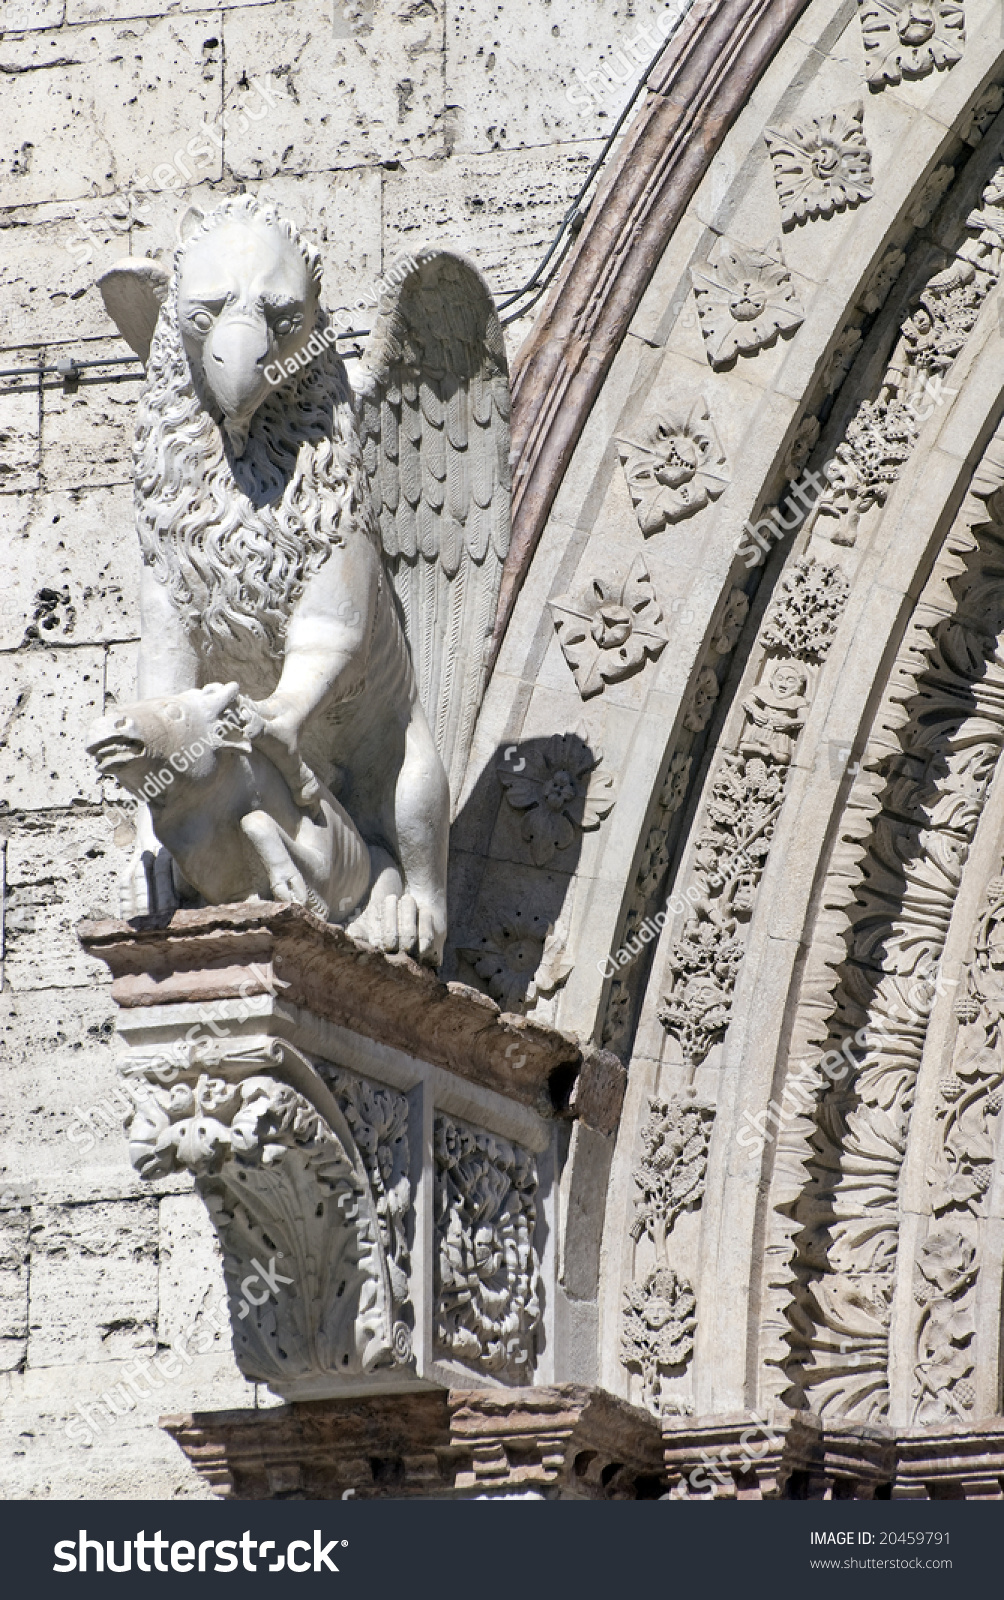 Perugia (Umbria, Italy) - Statue Of Gryphon (Griffin, Griffon) On A ...